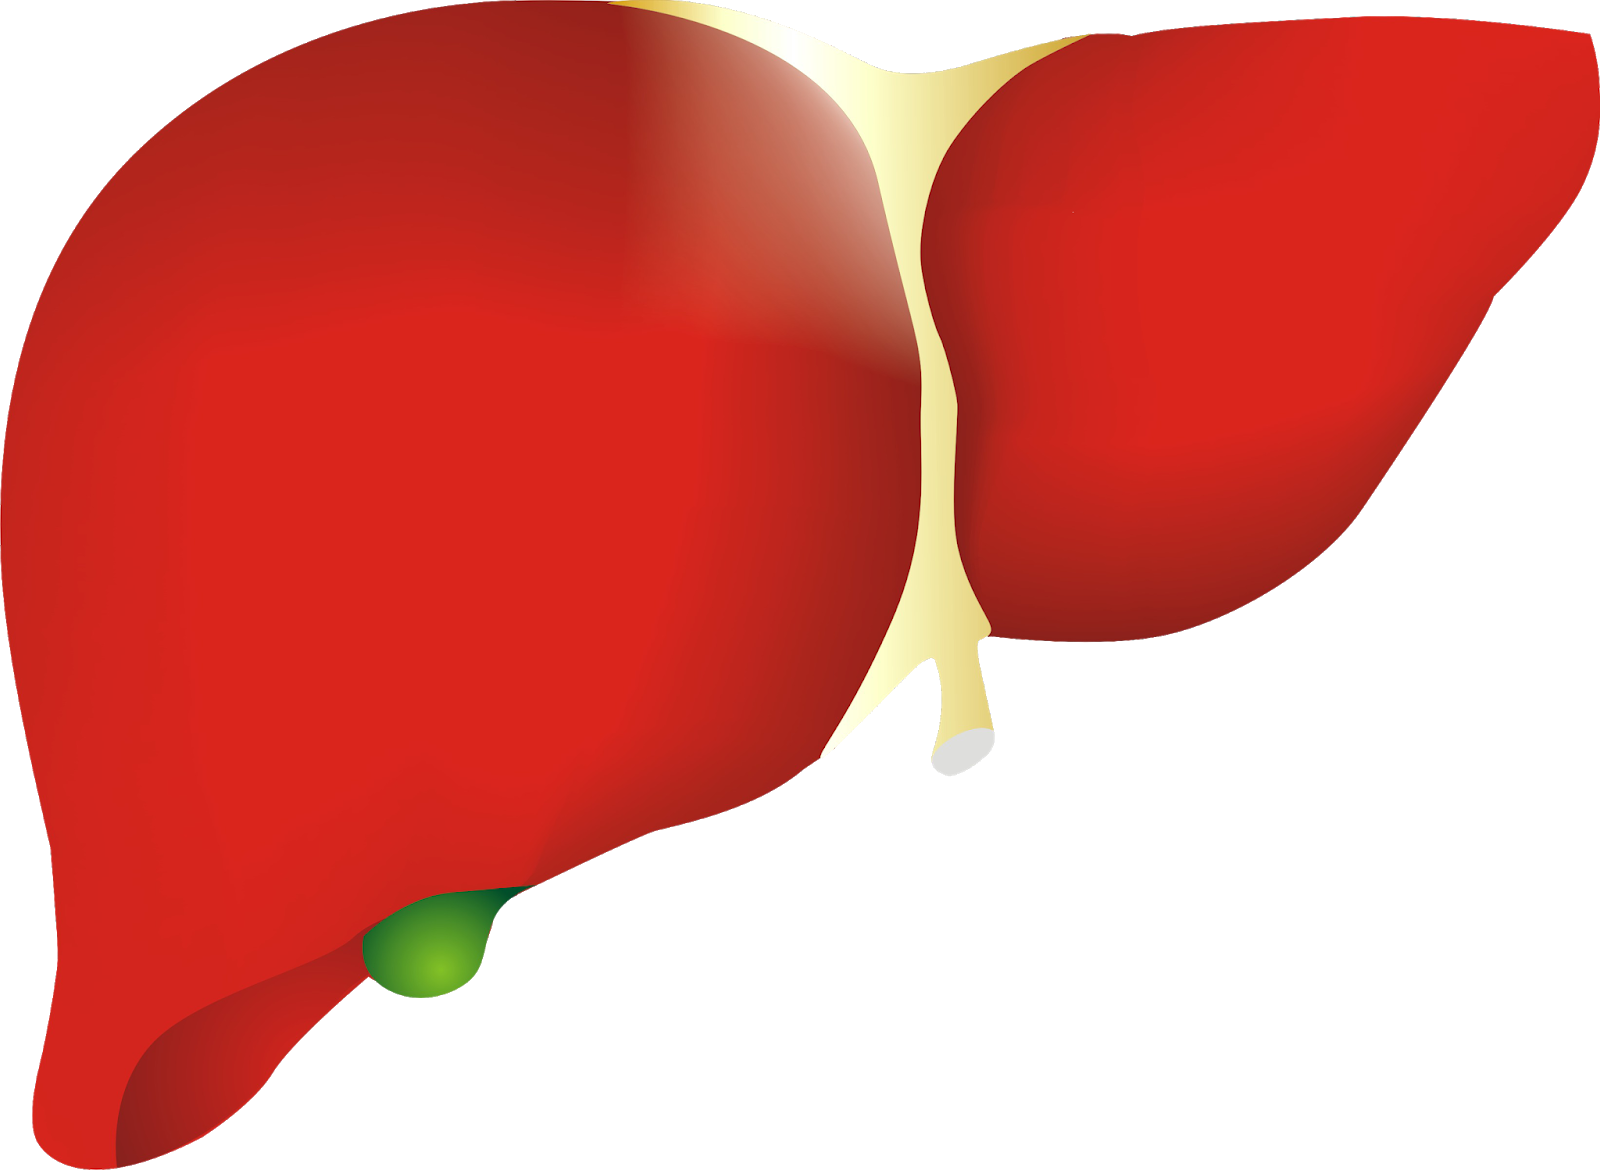 A Human Liver With A Green Center